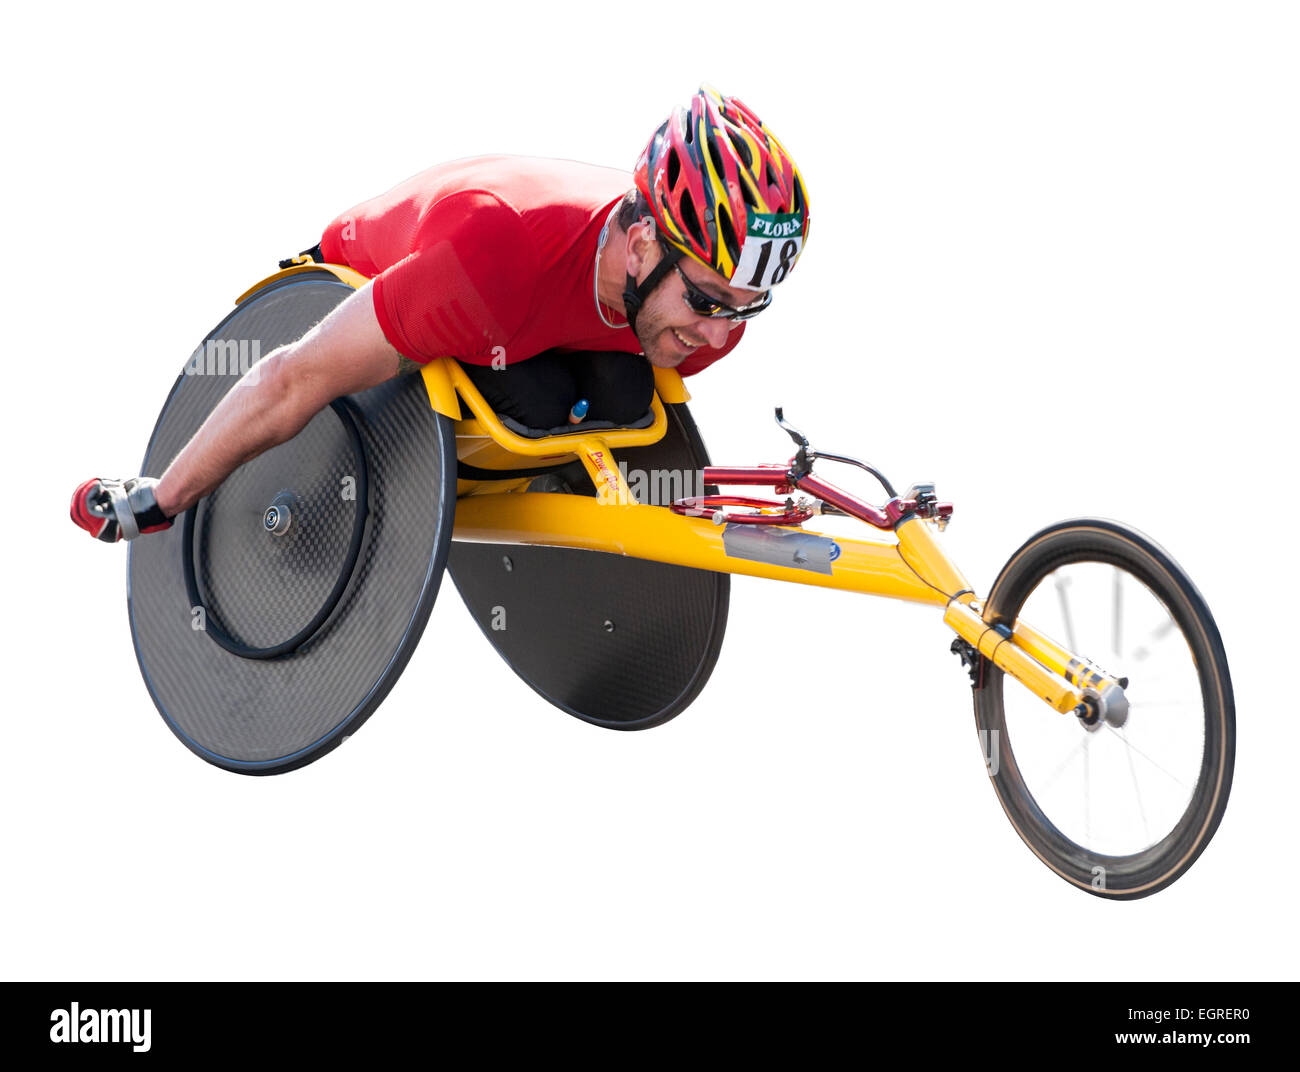 Disabled athlete taking part in the London marathon wheelchair race on a white background Stock Photo